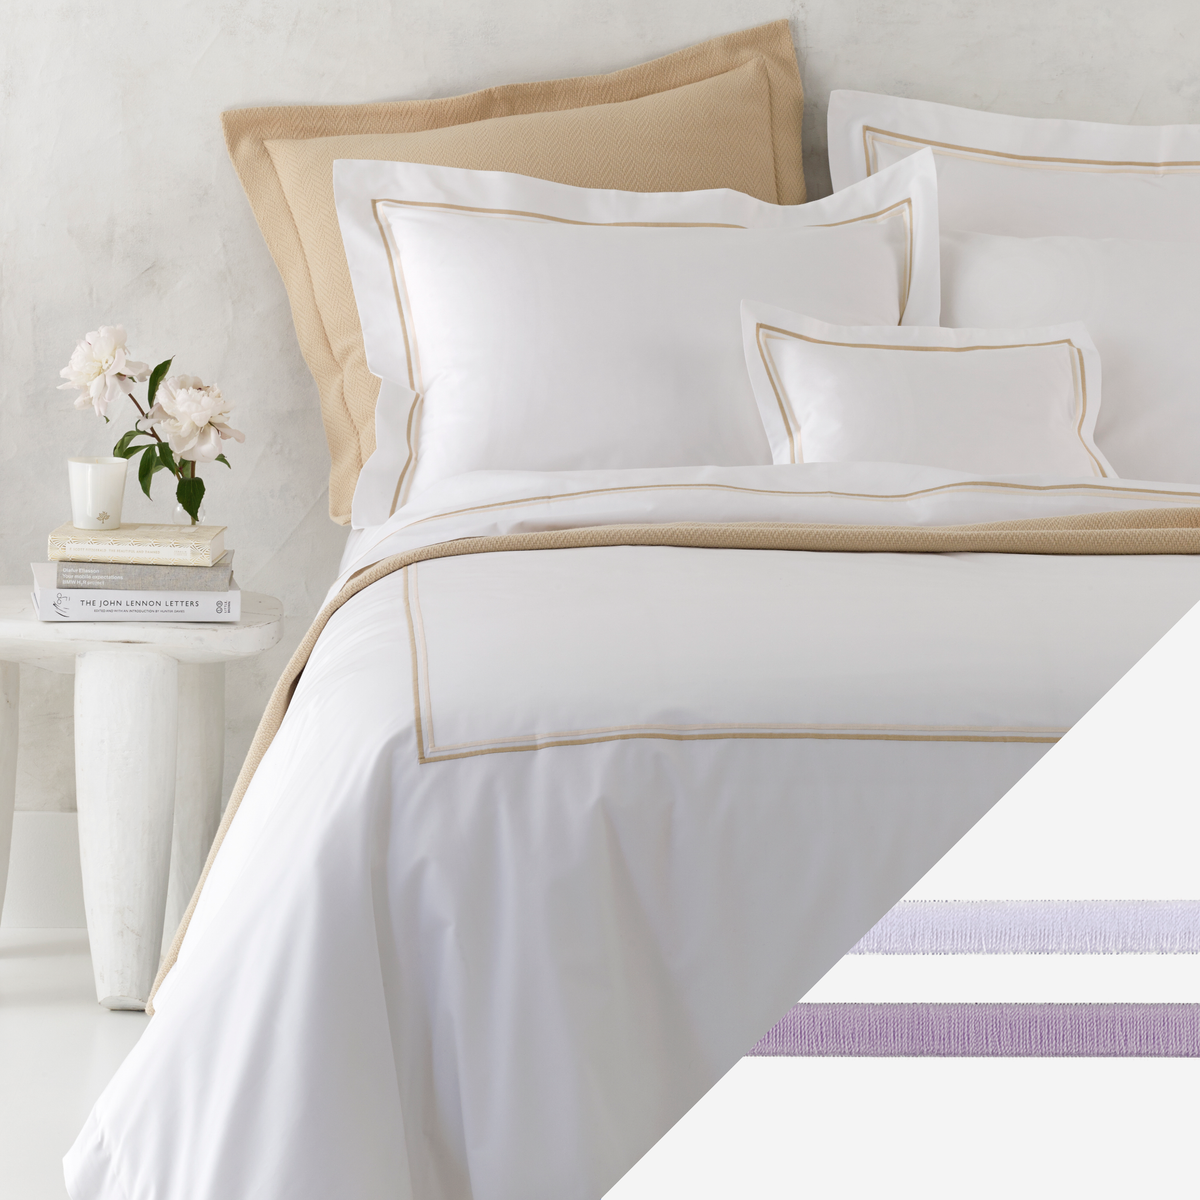 Corner Picture of Matouk Essex High End Bedding with Swatch in Lilac  Color